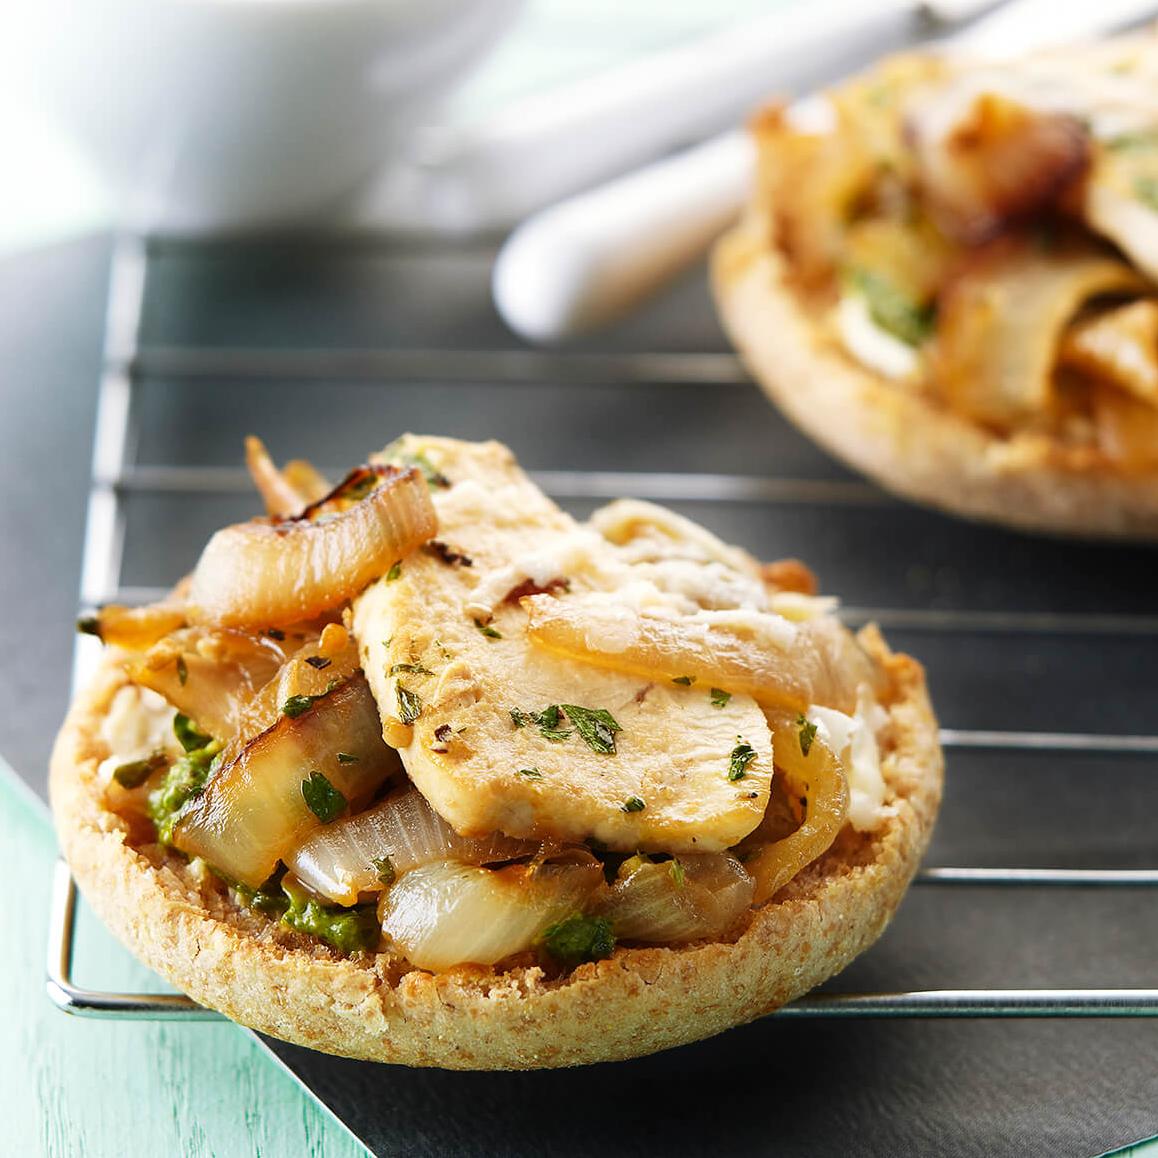  Easy to prepare and full of flavor, these chicken cheese muffins are a real treat.